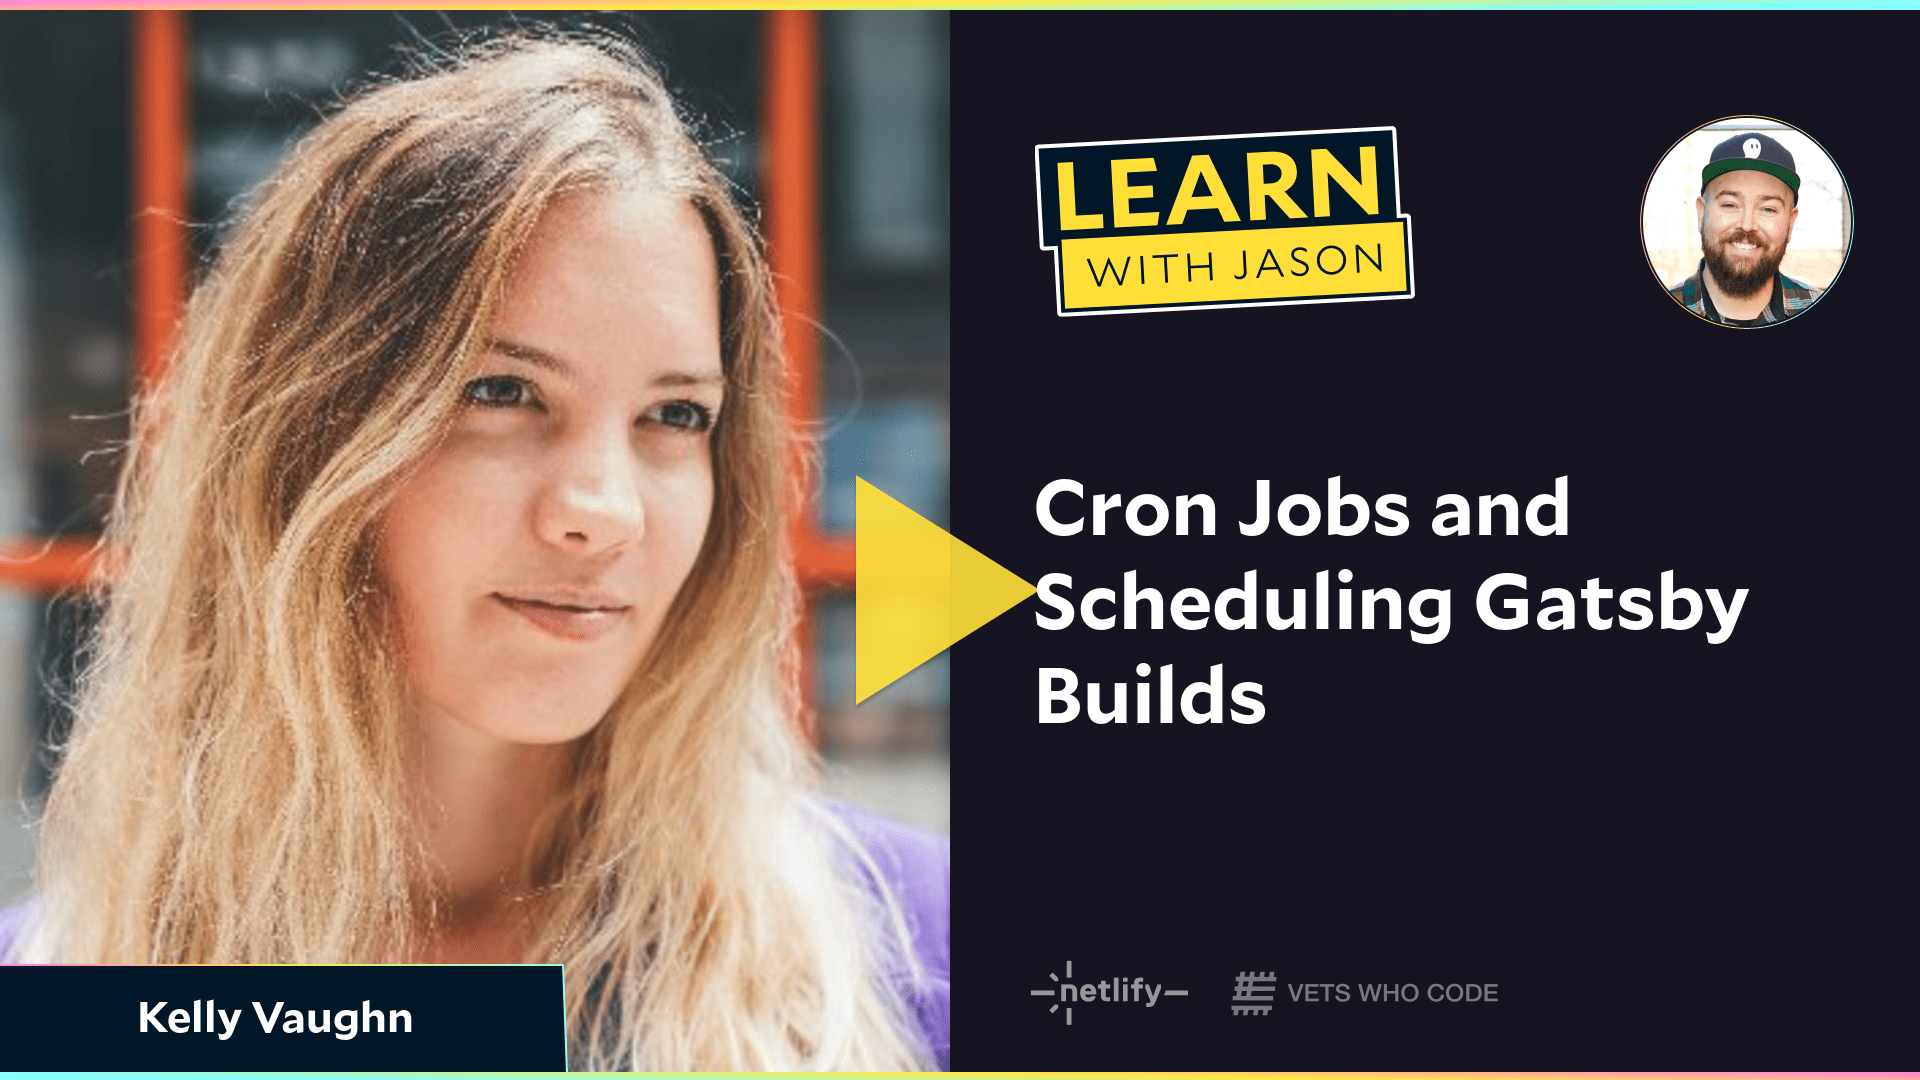 Cron Jobs and Scheduling Gatsby Builds (with Kelly Vaughn)